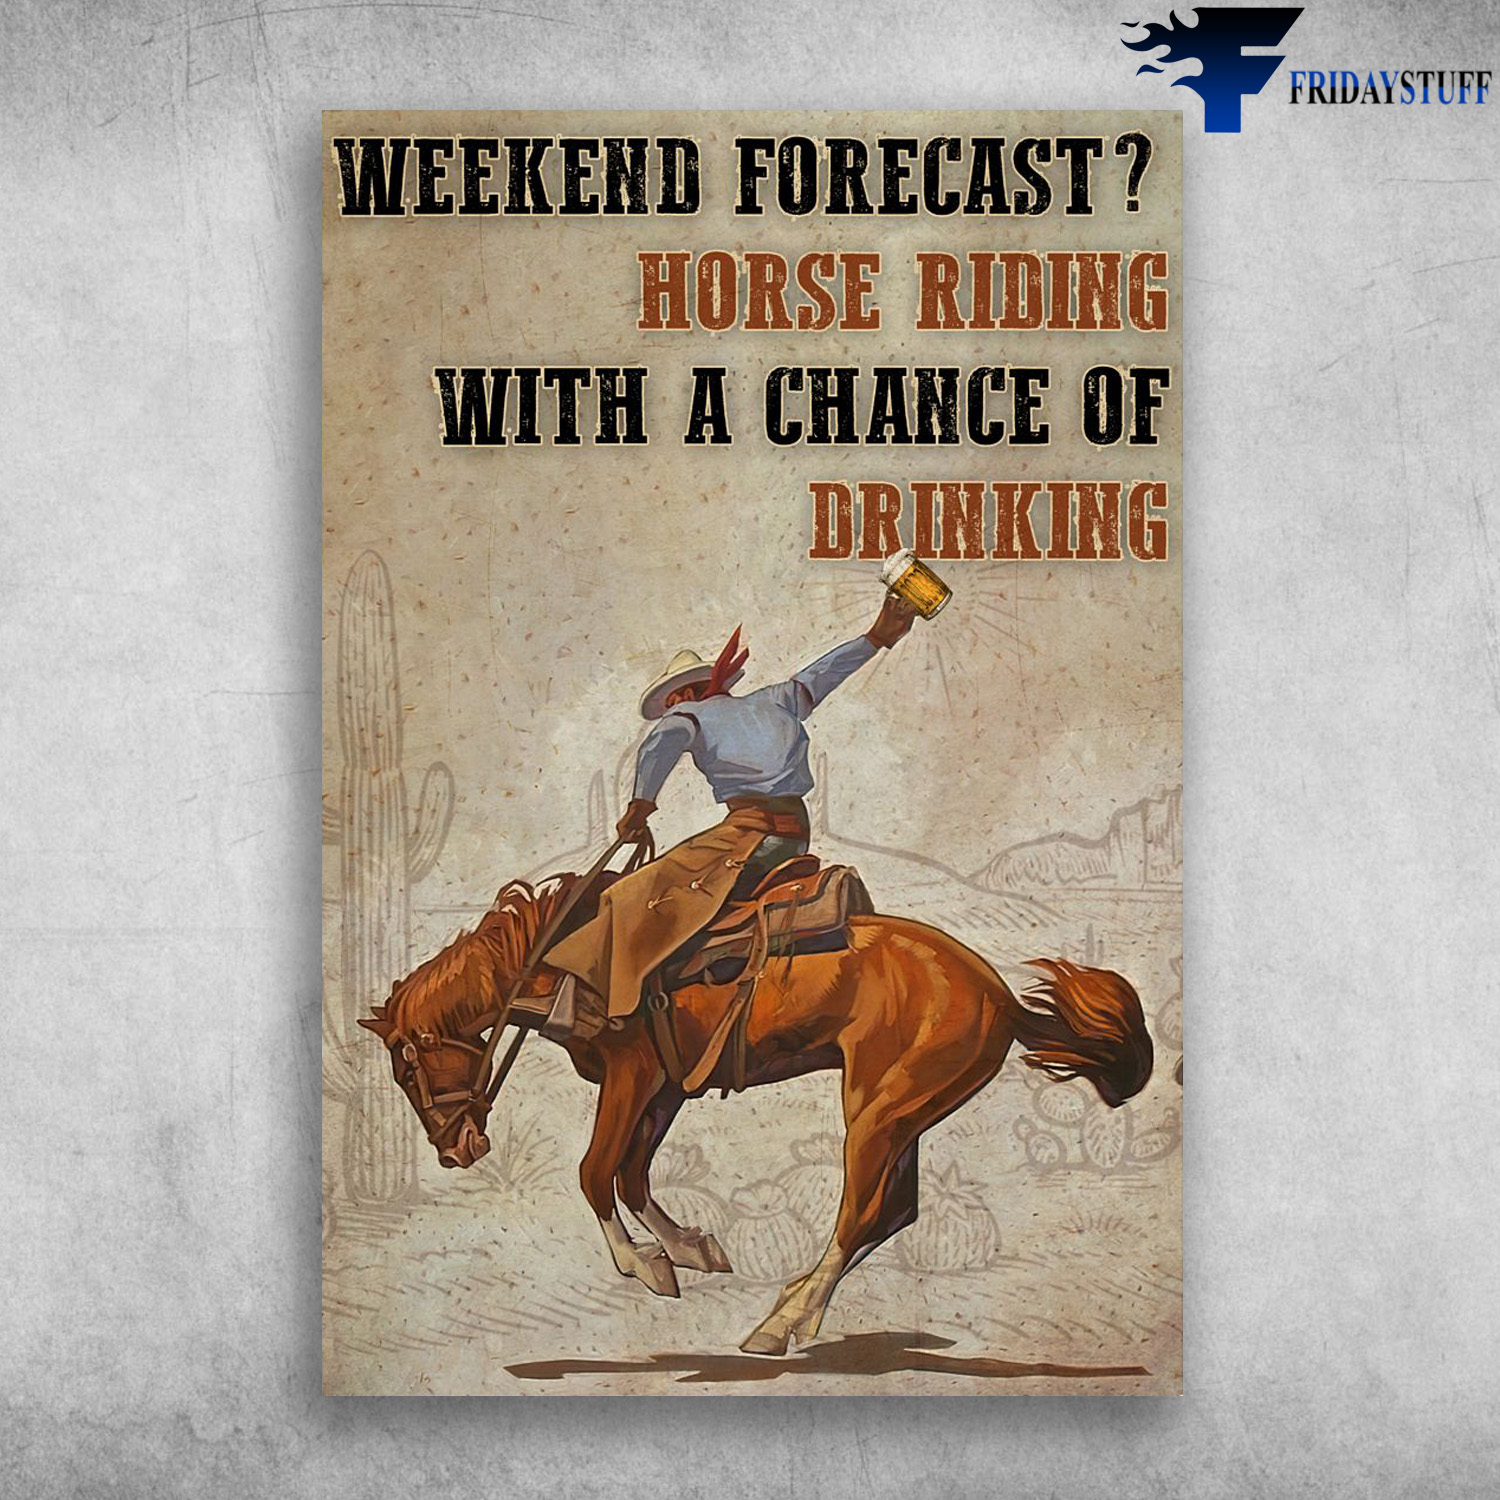 Cowboy Riding Horse - Weekend Forecast, Horse Riding With A Chance Of Drinking